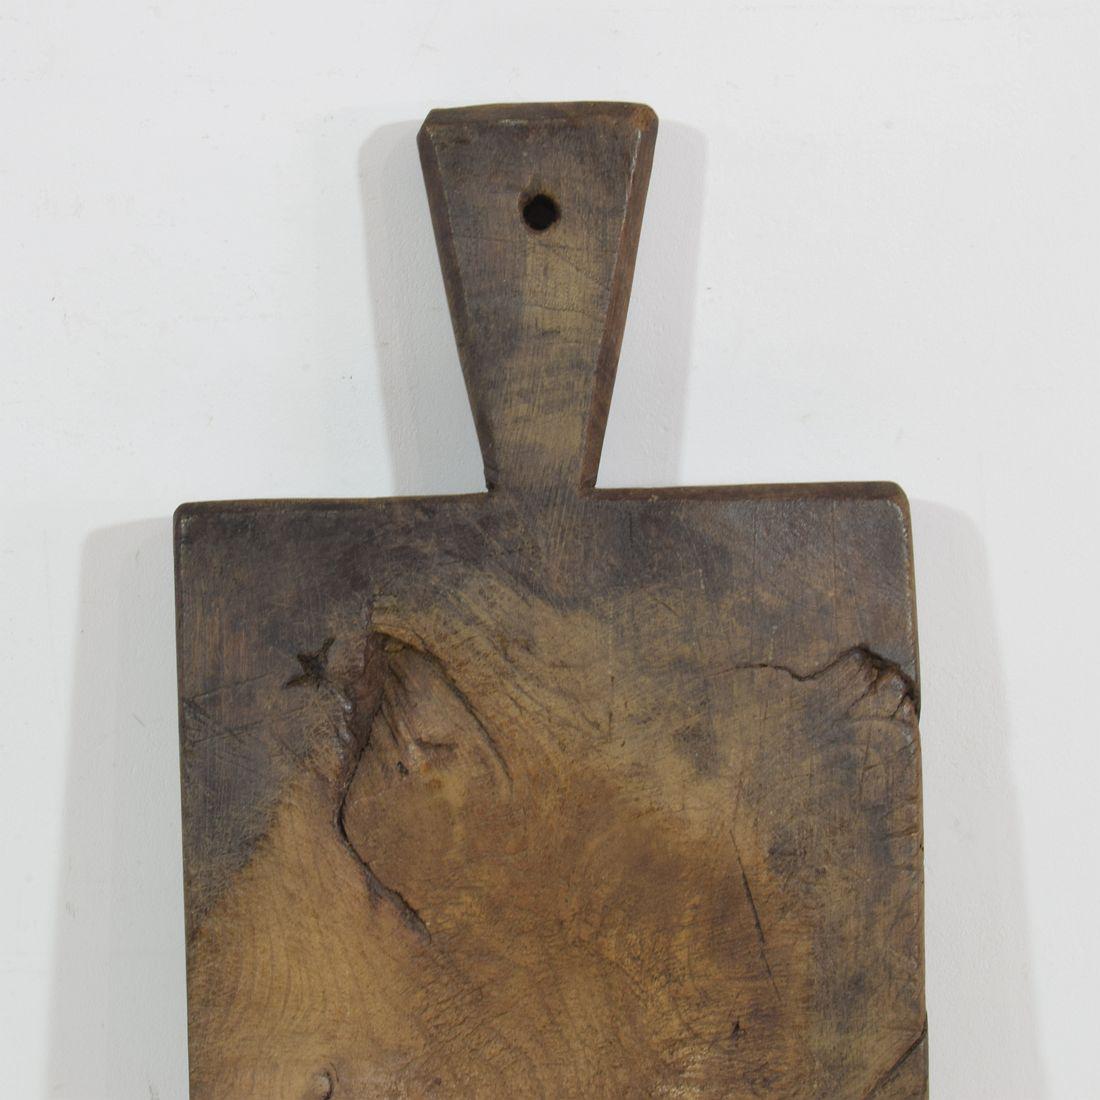 French 19th Century, Wooden Chopping or Cutting Board 6